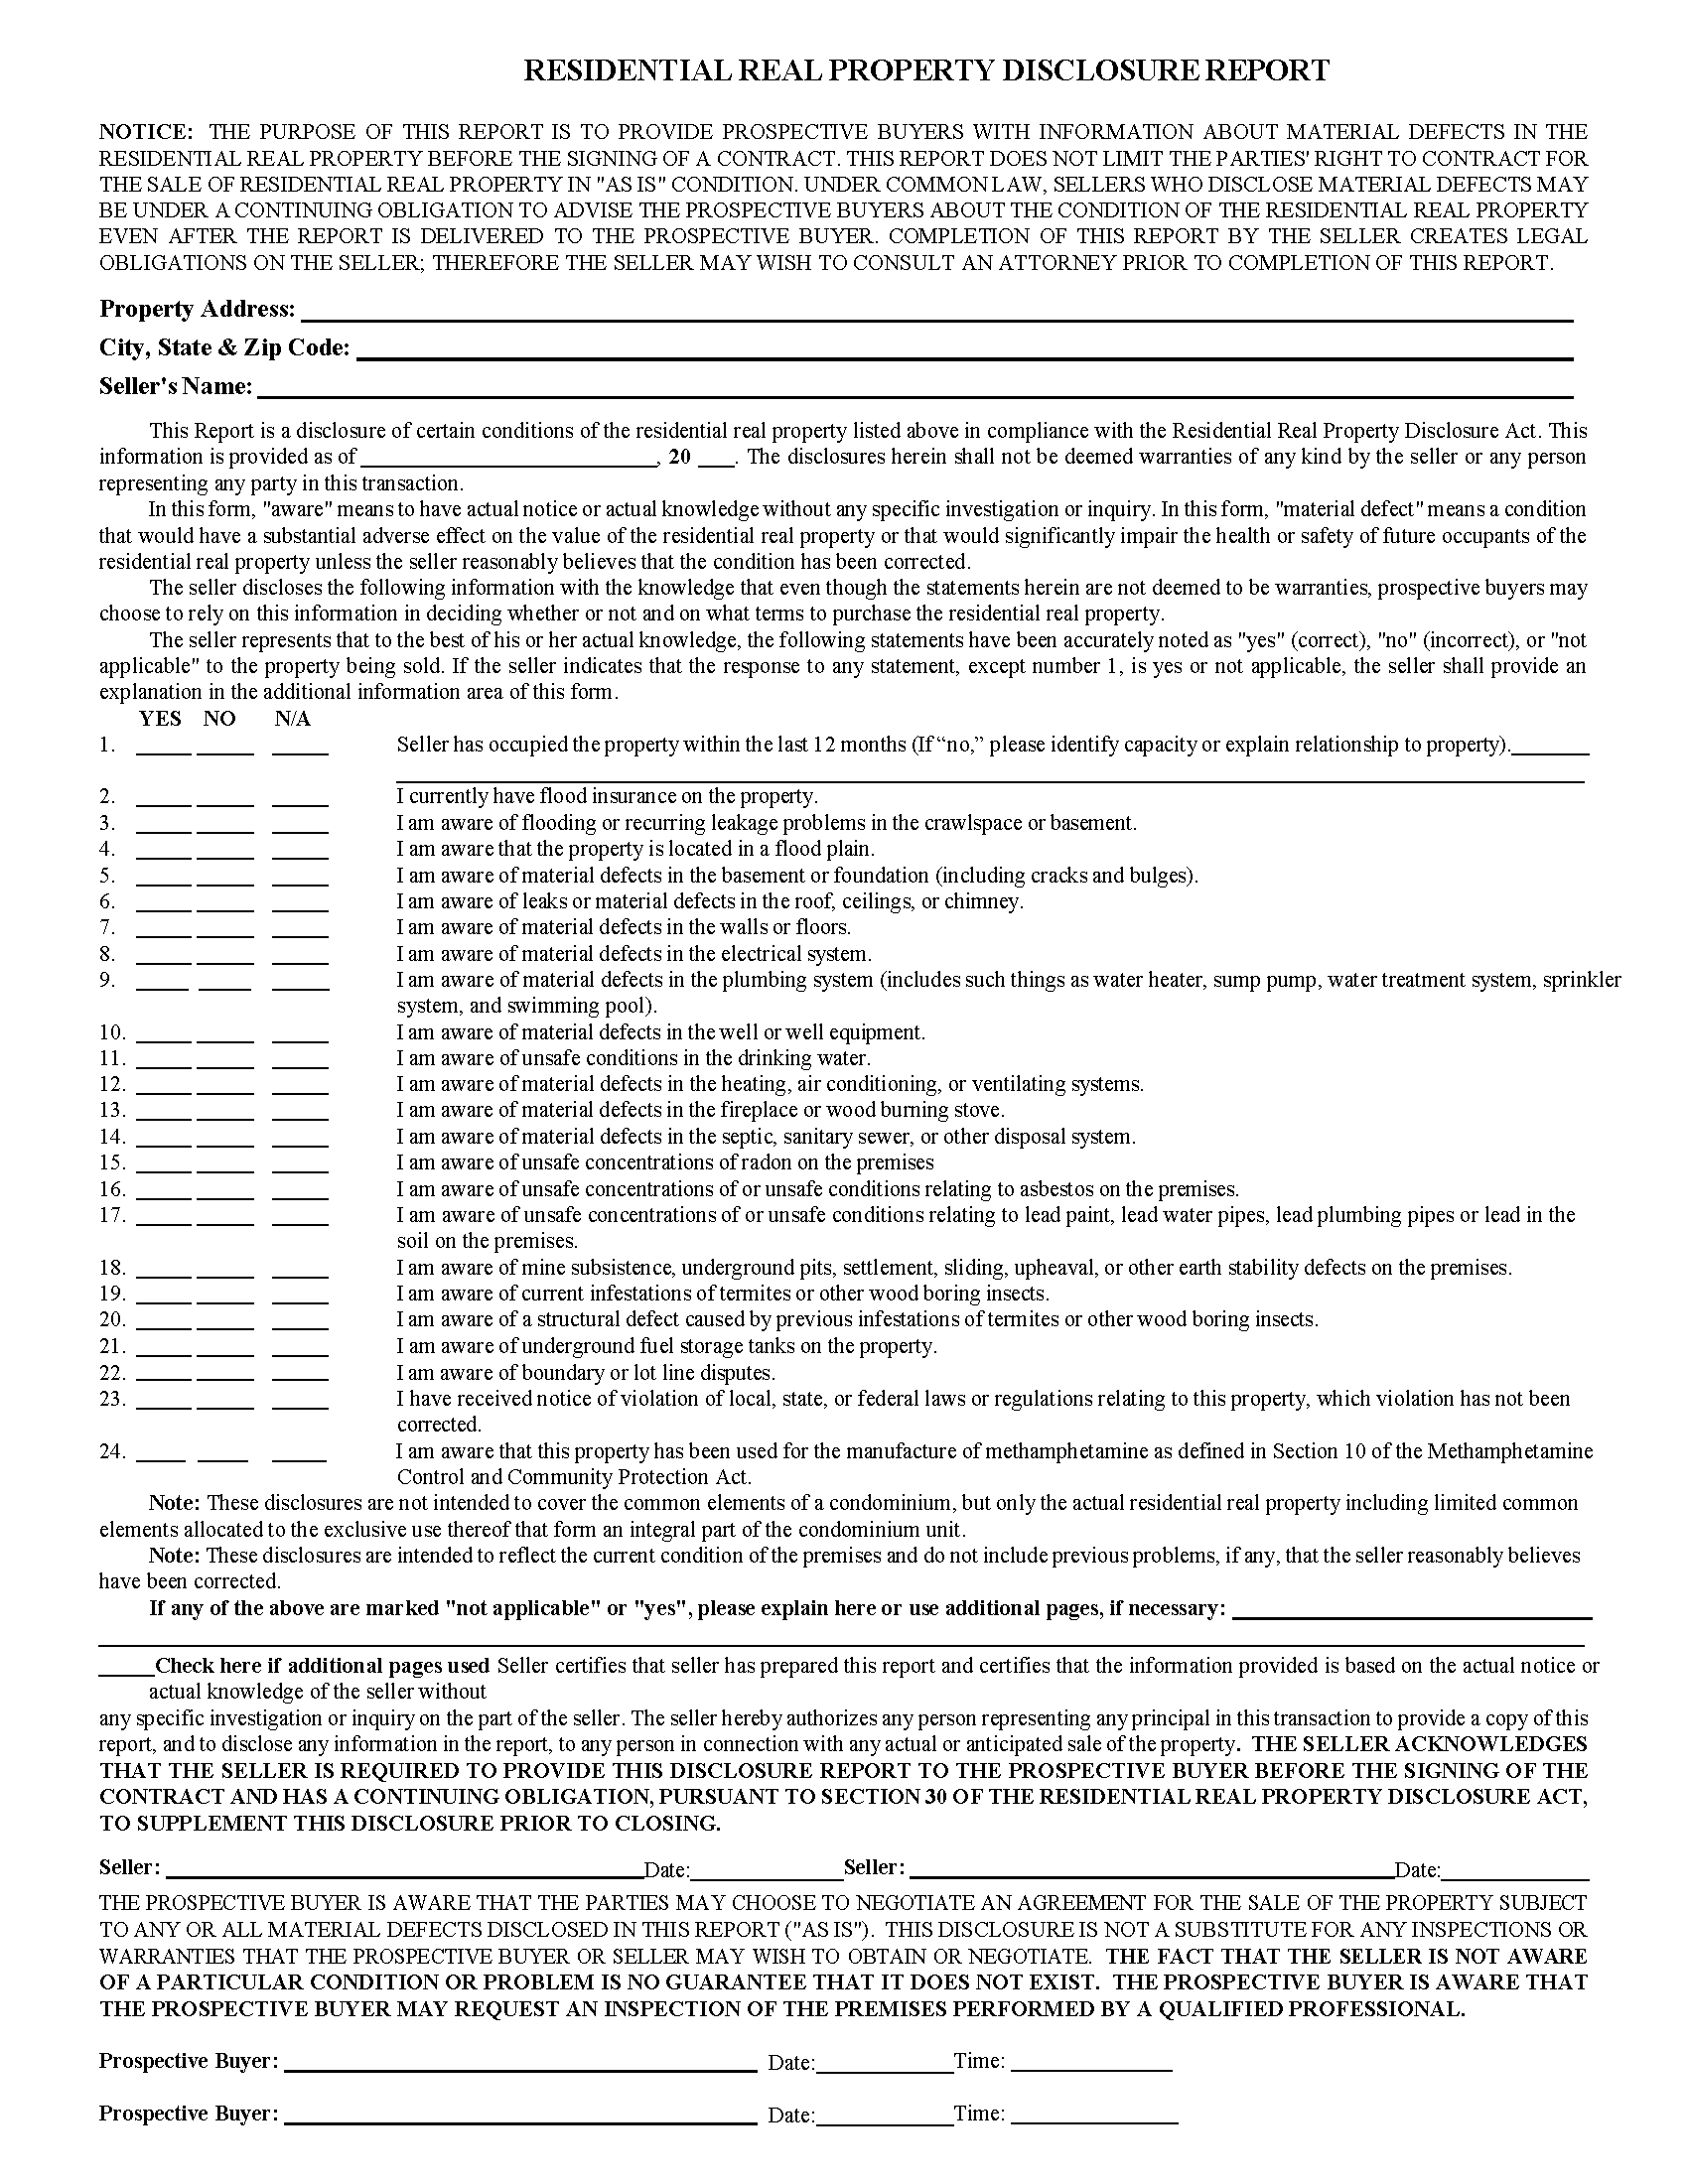 Iroquois County Real Property Disclosure Form